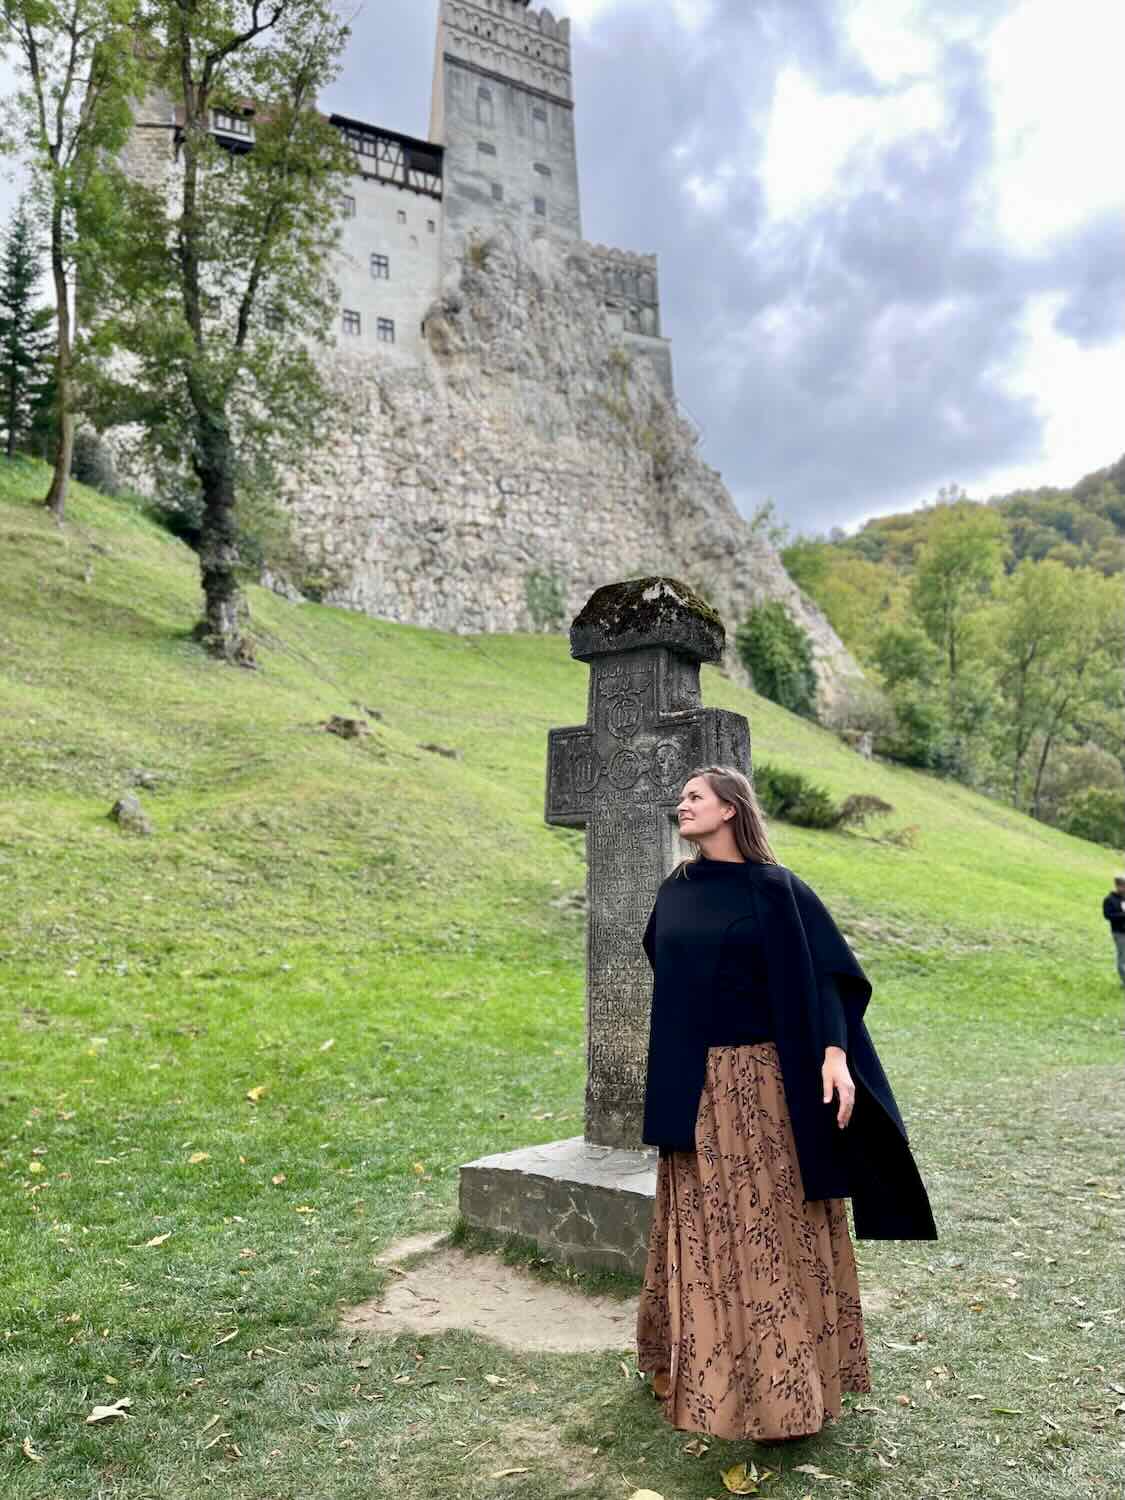 A woman in a black cape and patterned skirt stands contemplatively by a stone cross, with the towering, grey walls of Bran Castle rising in the background amidst lush greenery and a moody sky.